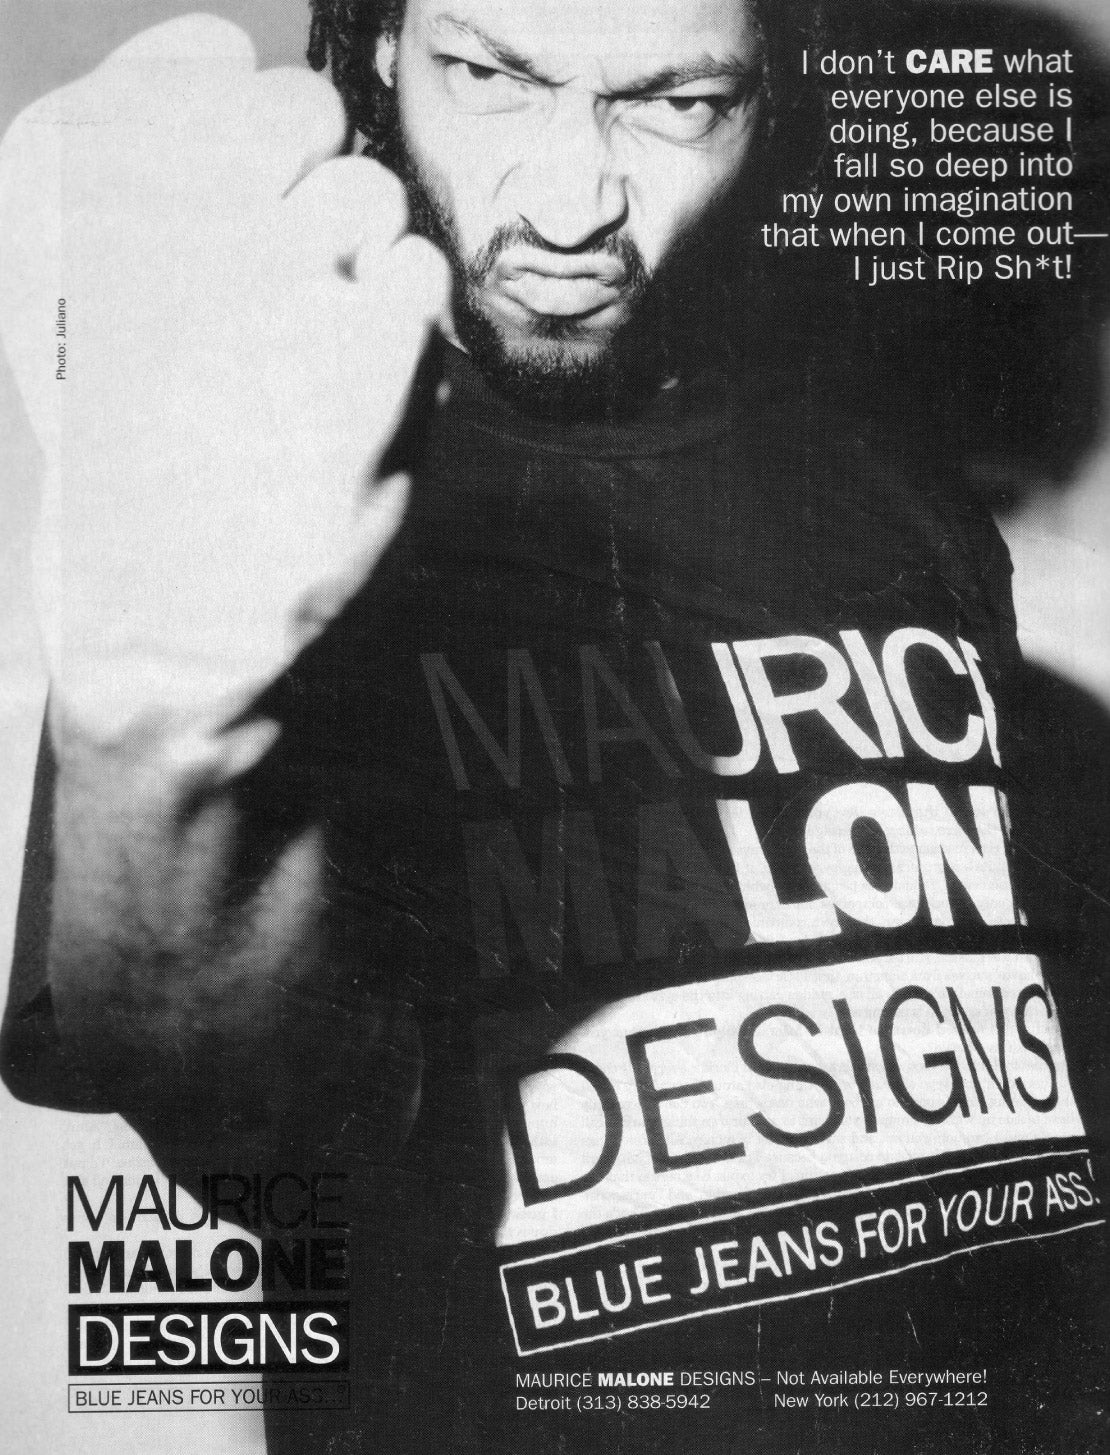 Fashion designer Maurice Malone appears in his own advertisement - Rip Shit